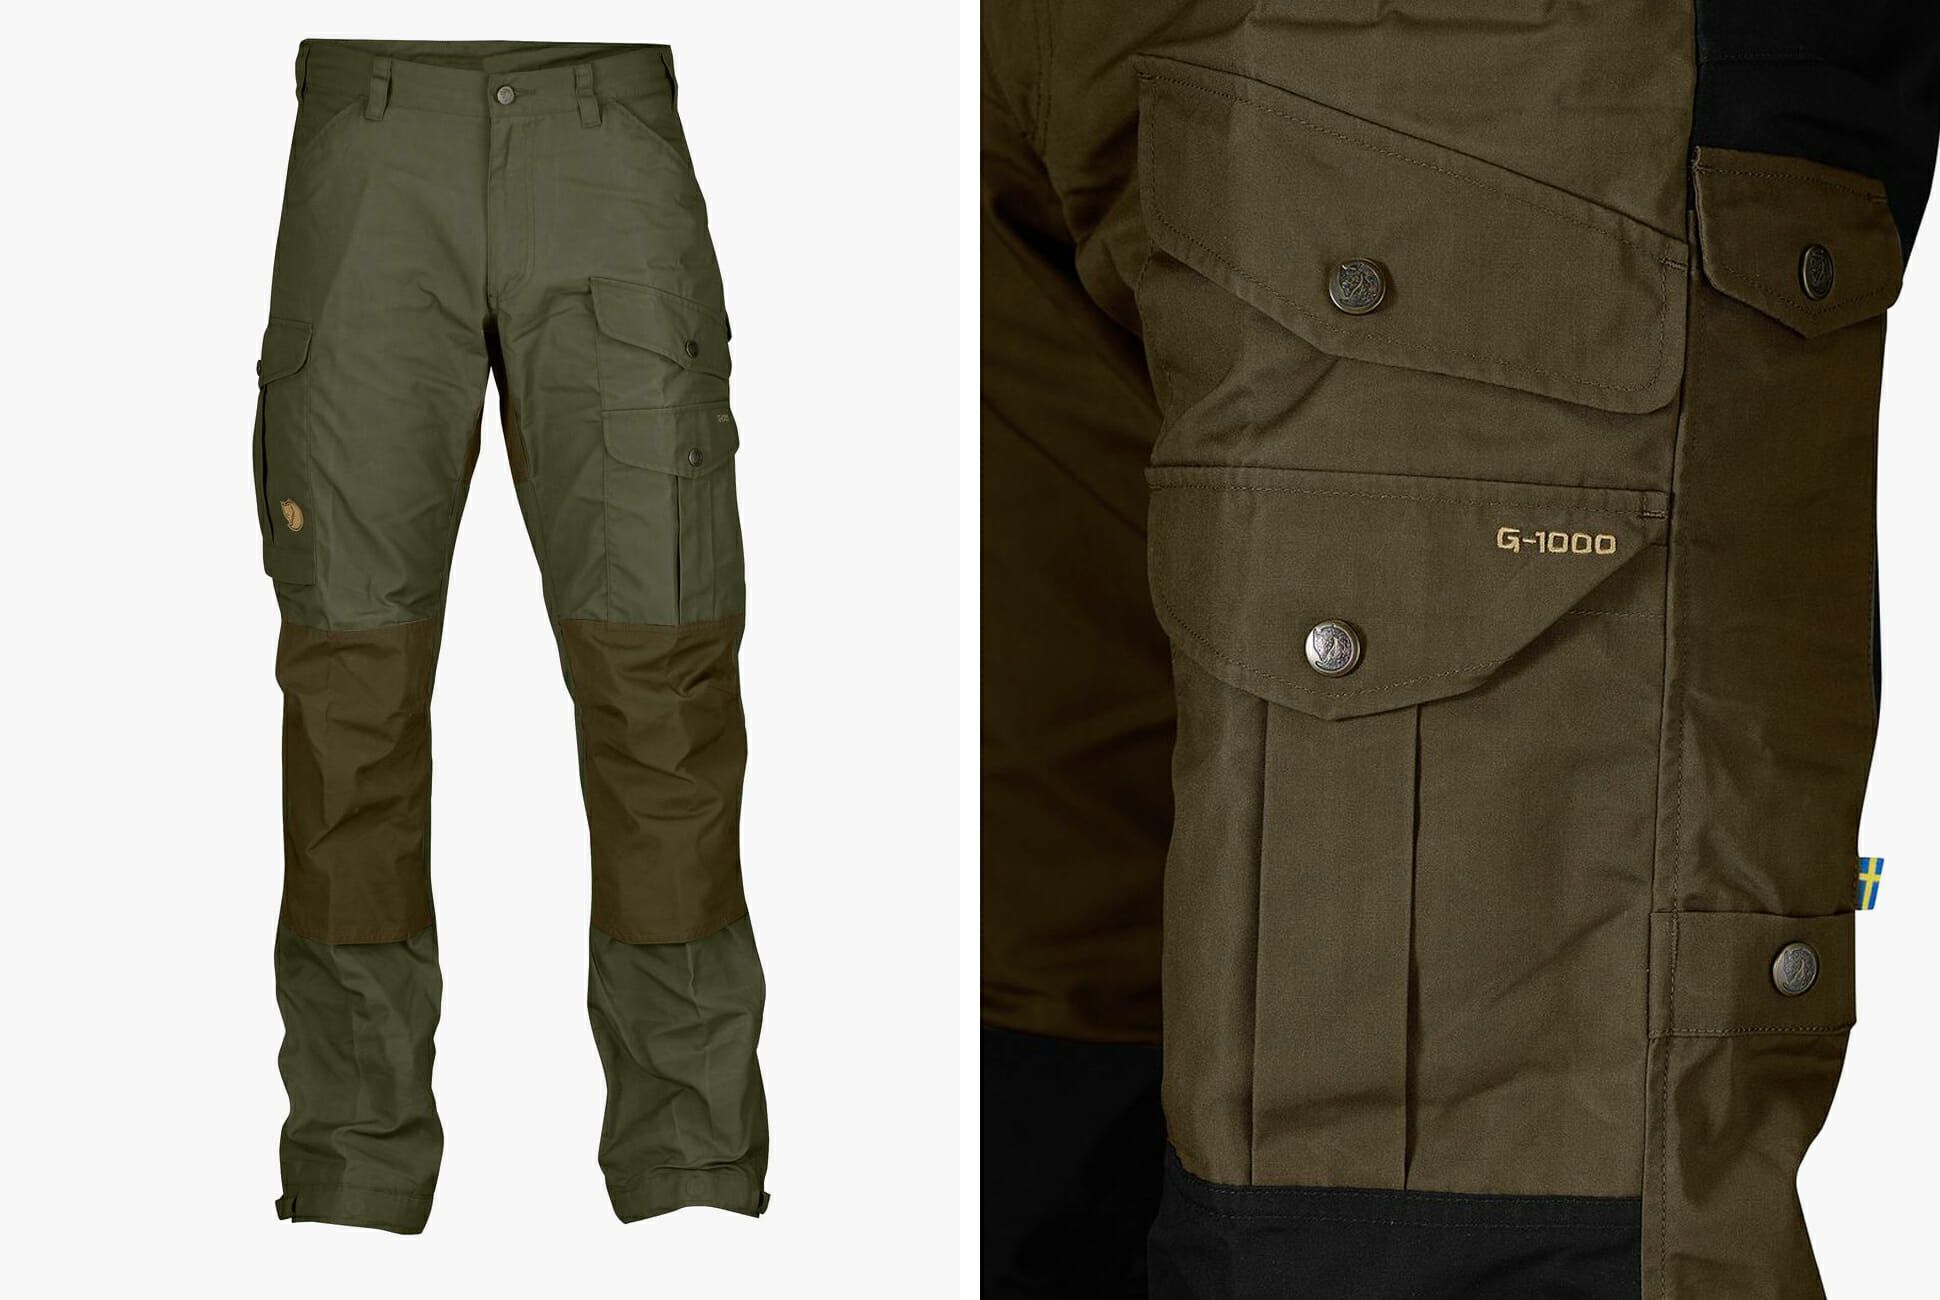 These Amazing Fjallraven Hiking Pants Are a $75 Off But There's a Catch